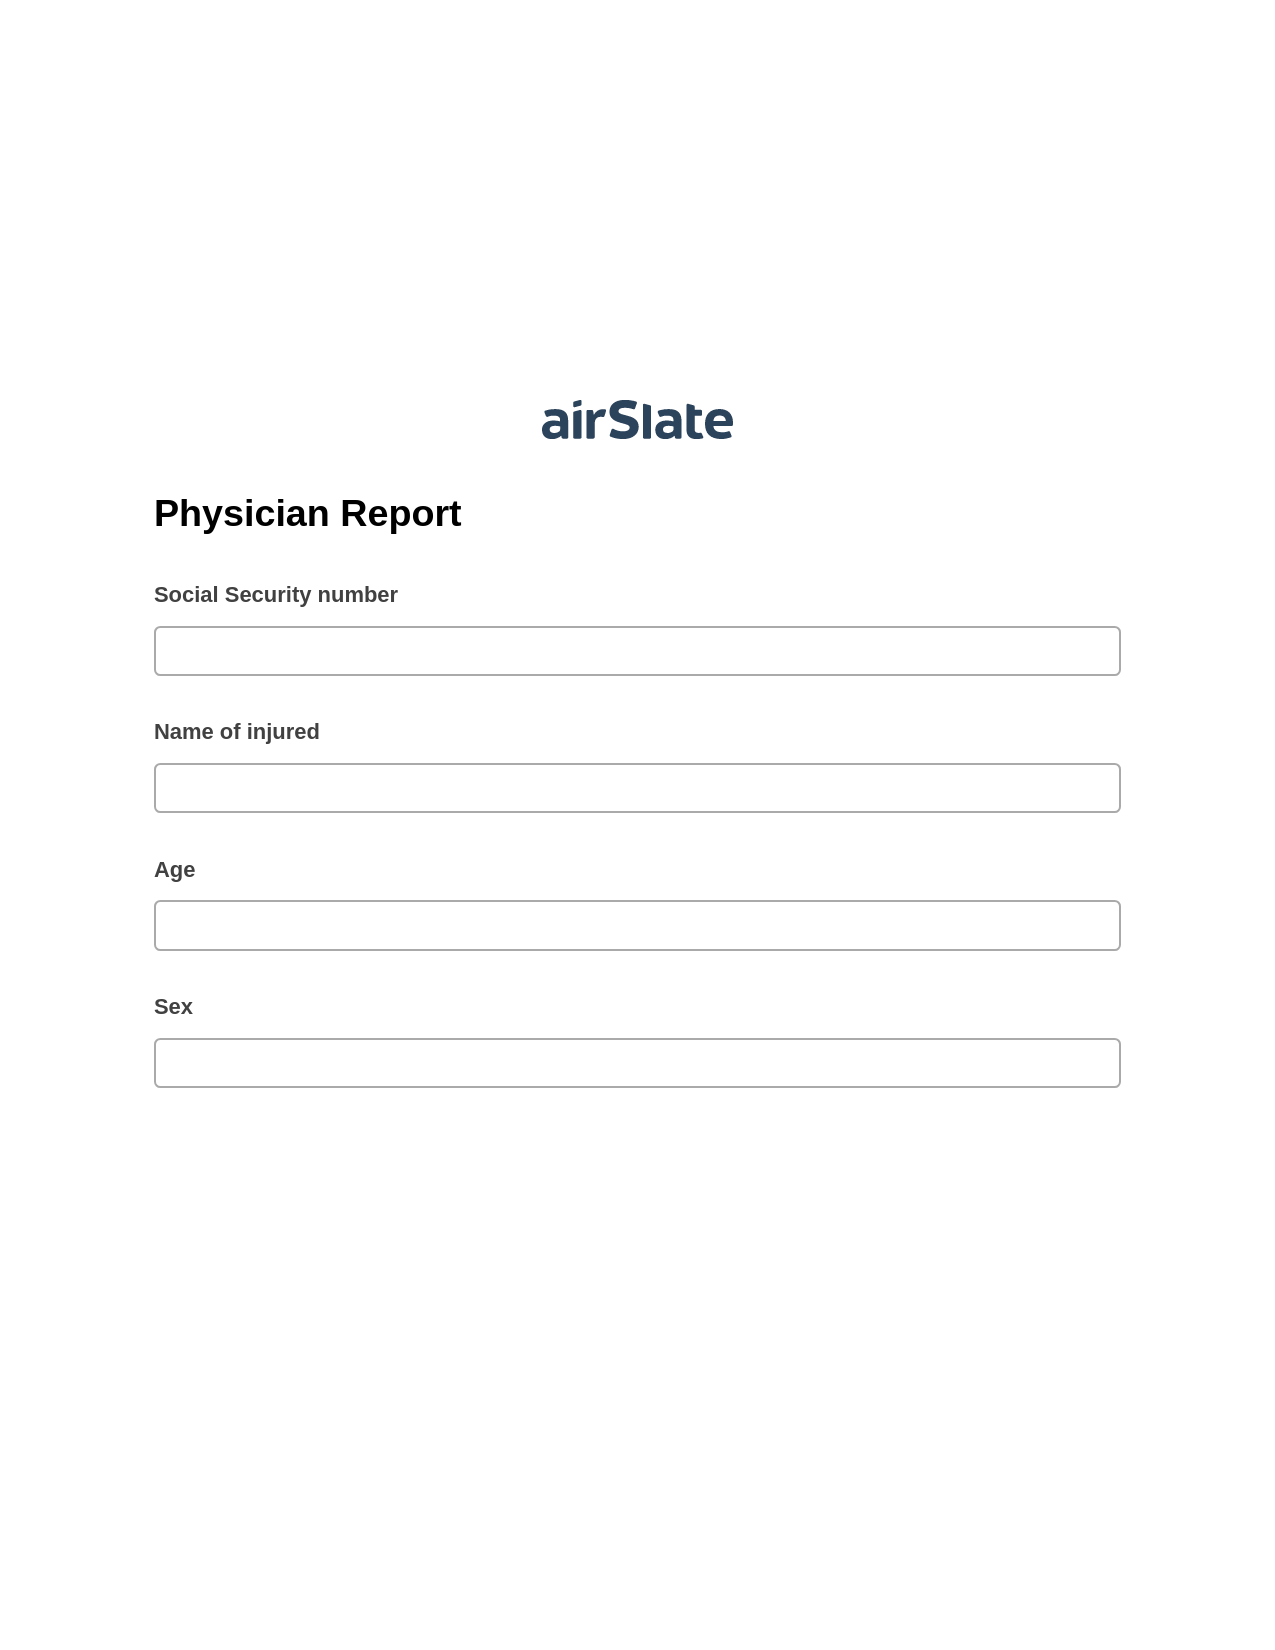 Physician Report Pre-fill from CSV File Bot, Update NetSuite Record Bot, Archive to SharePoint Folder Bot